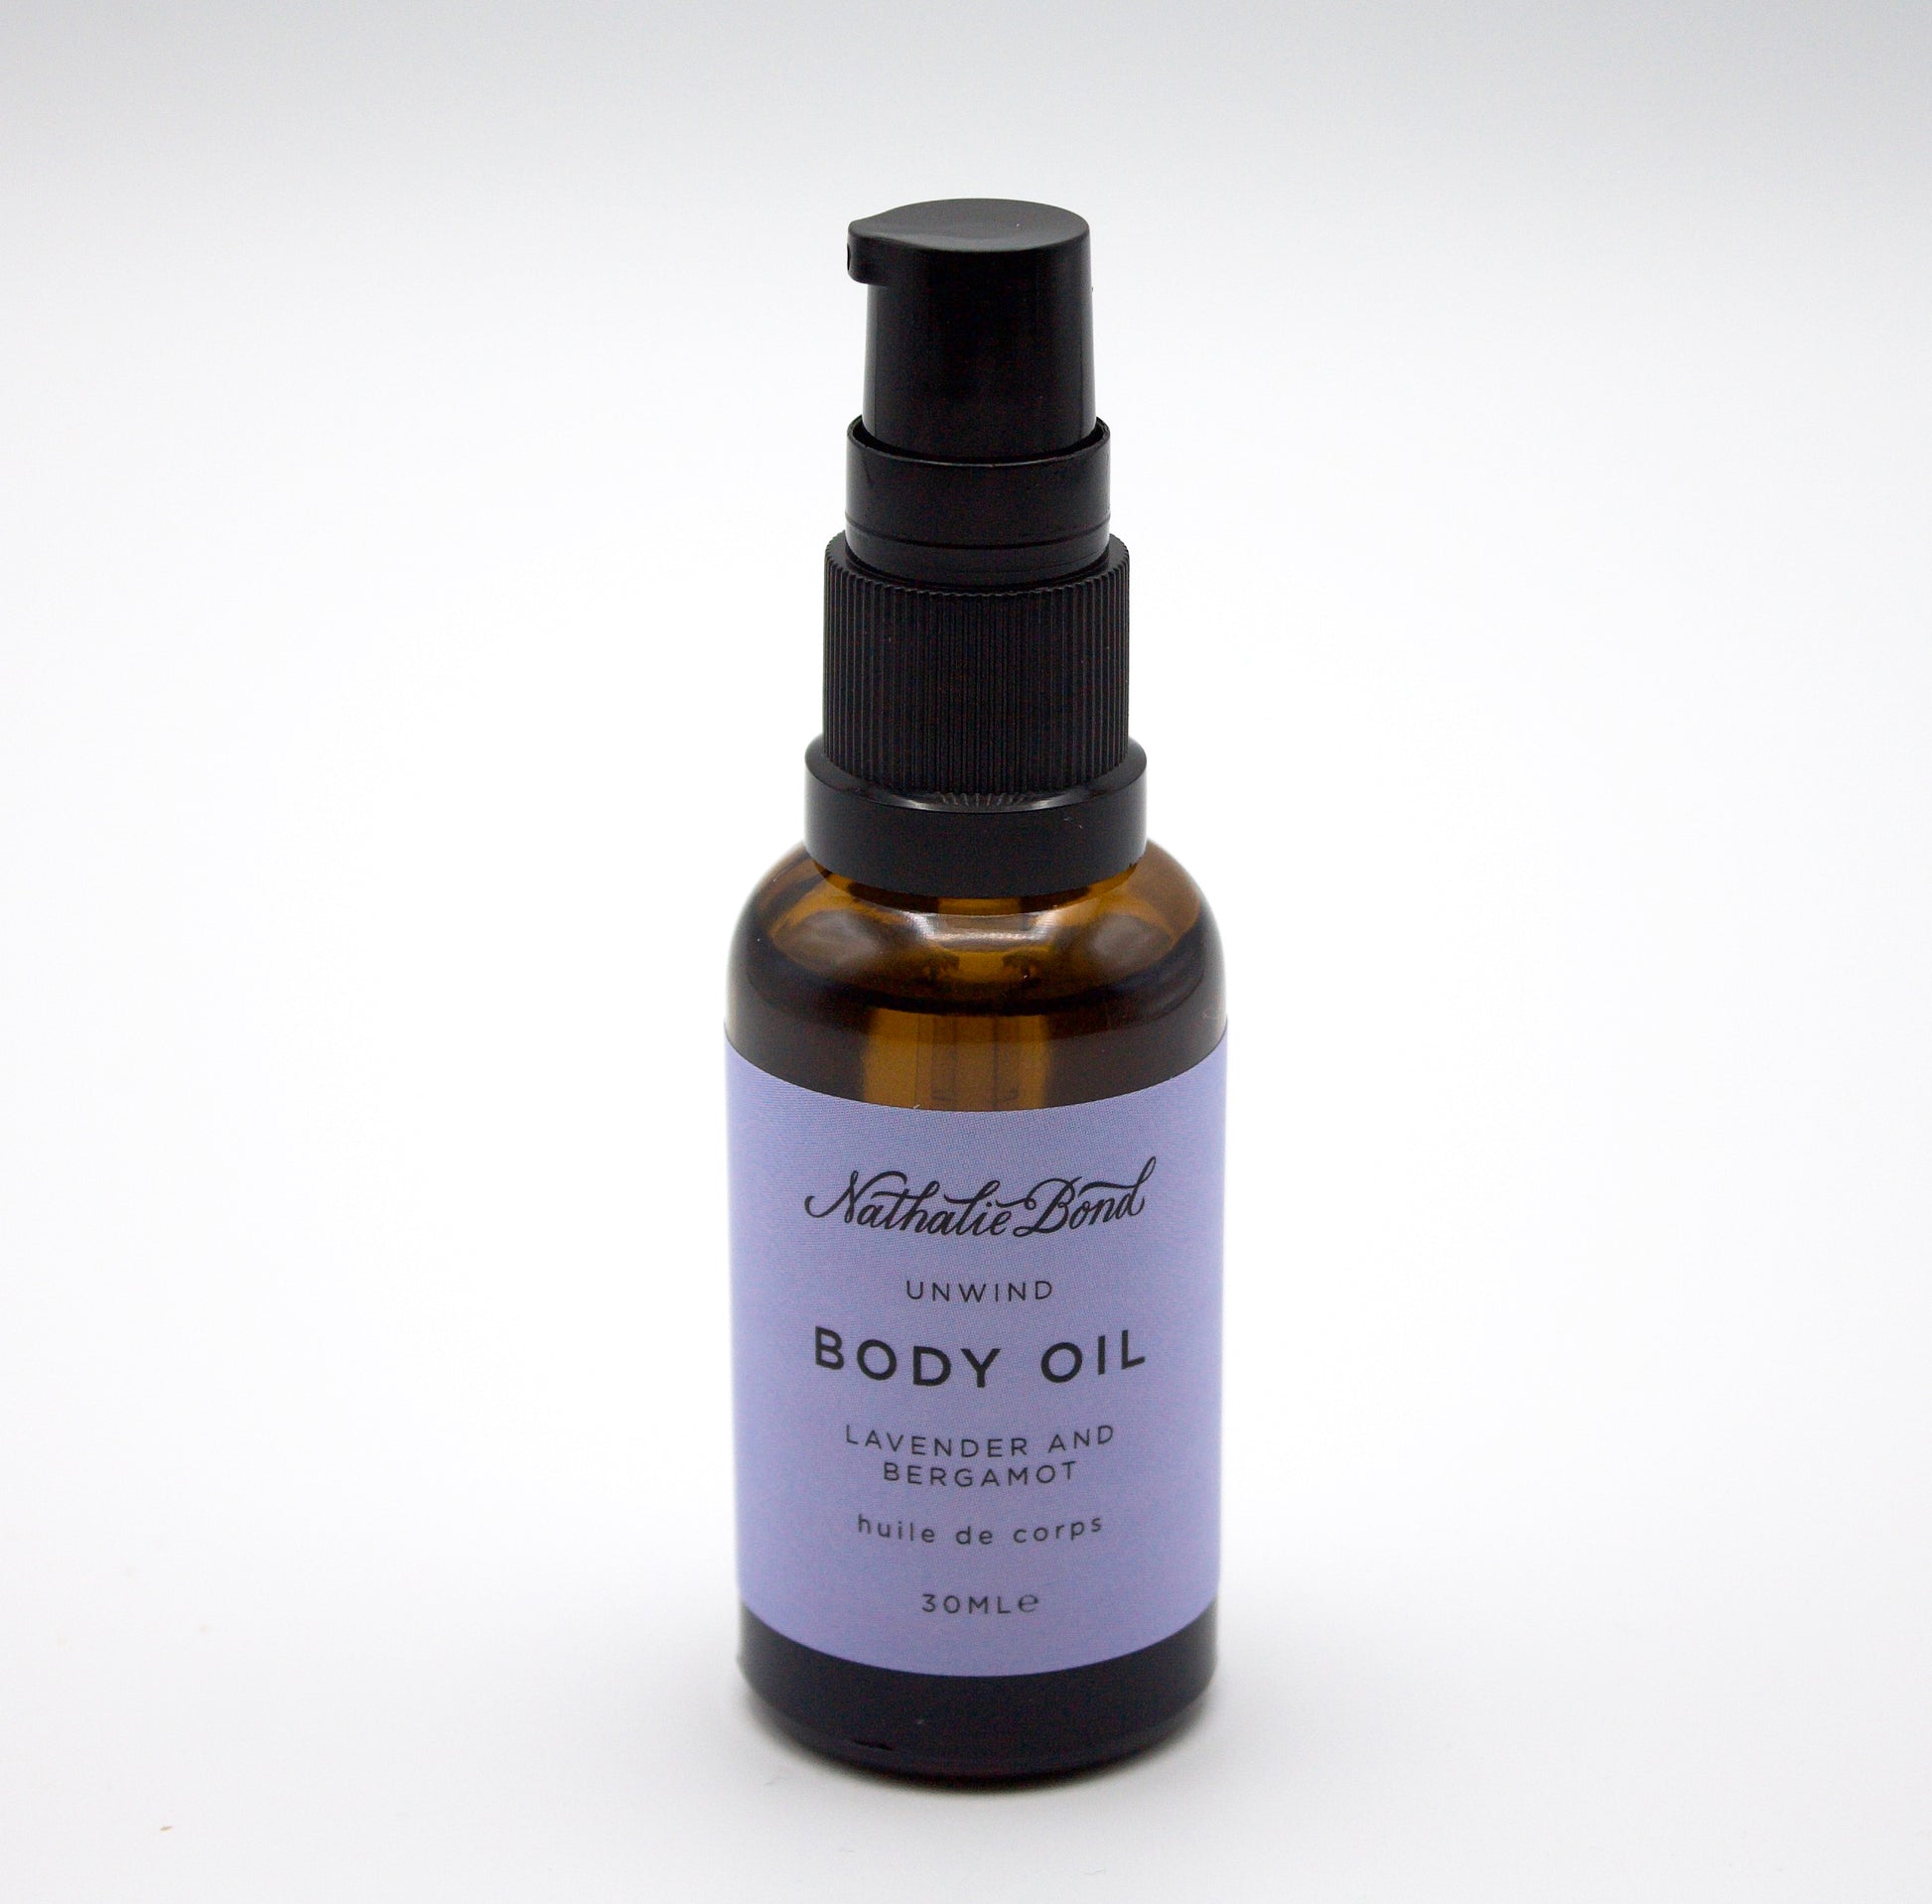 Lavender body oil from The Giving Box